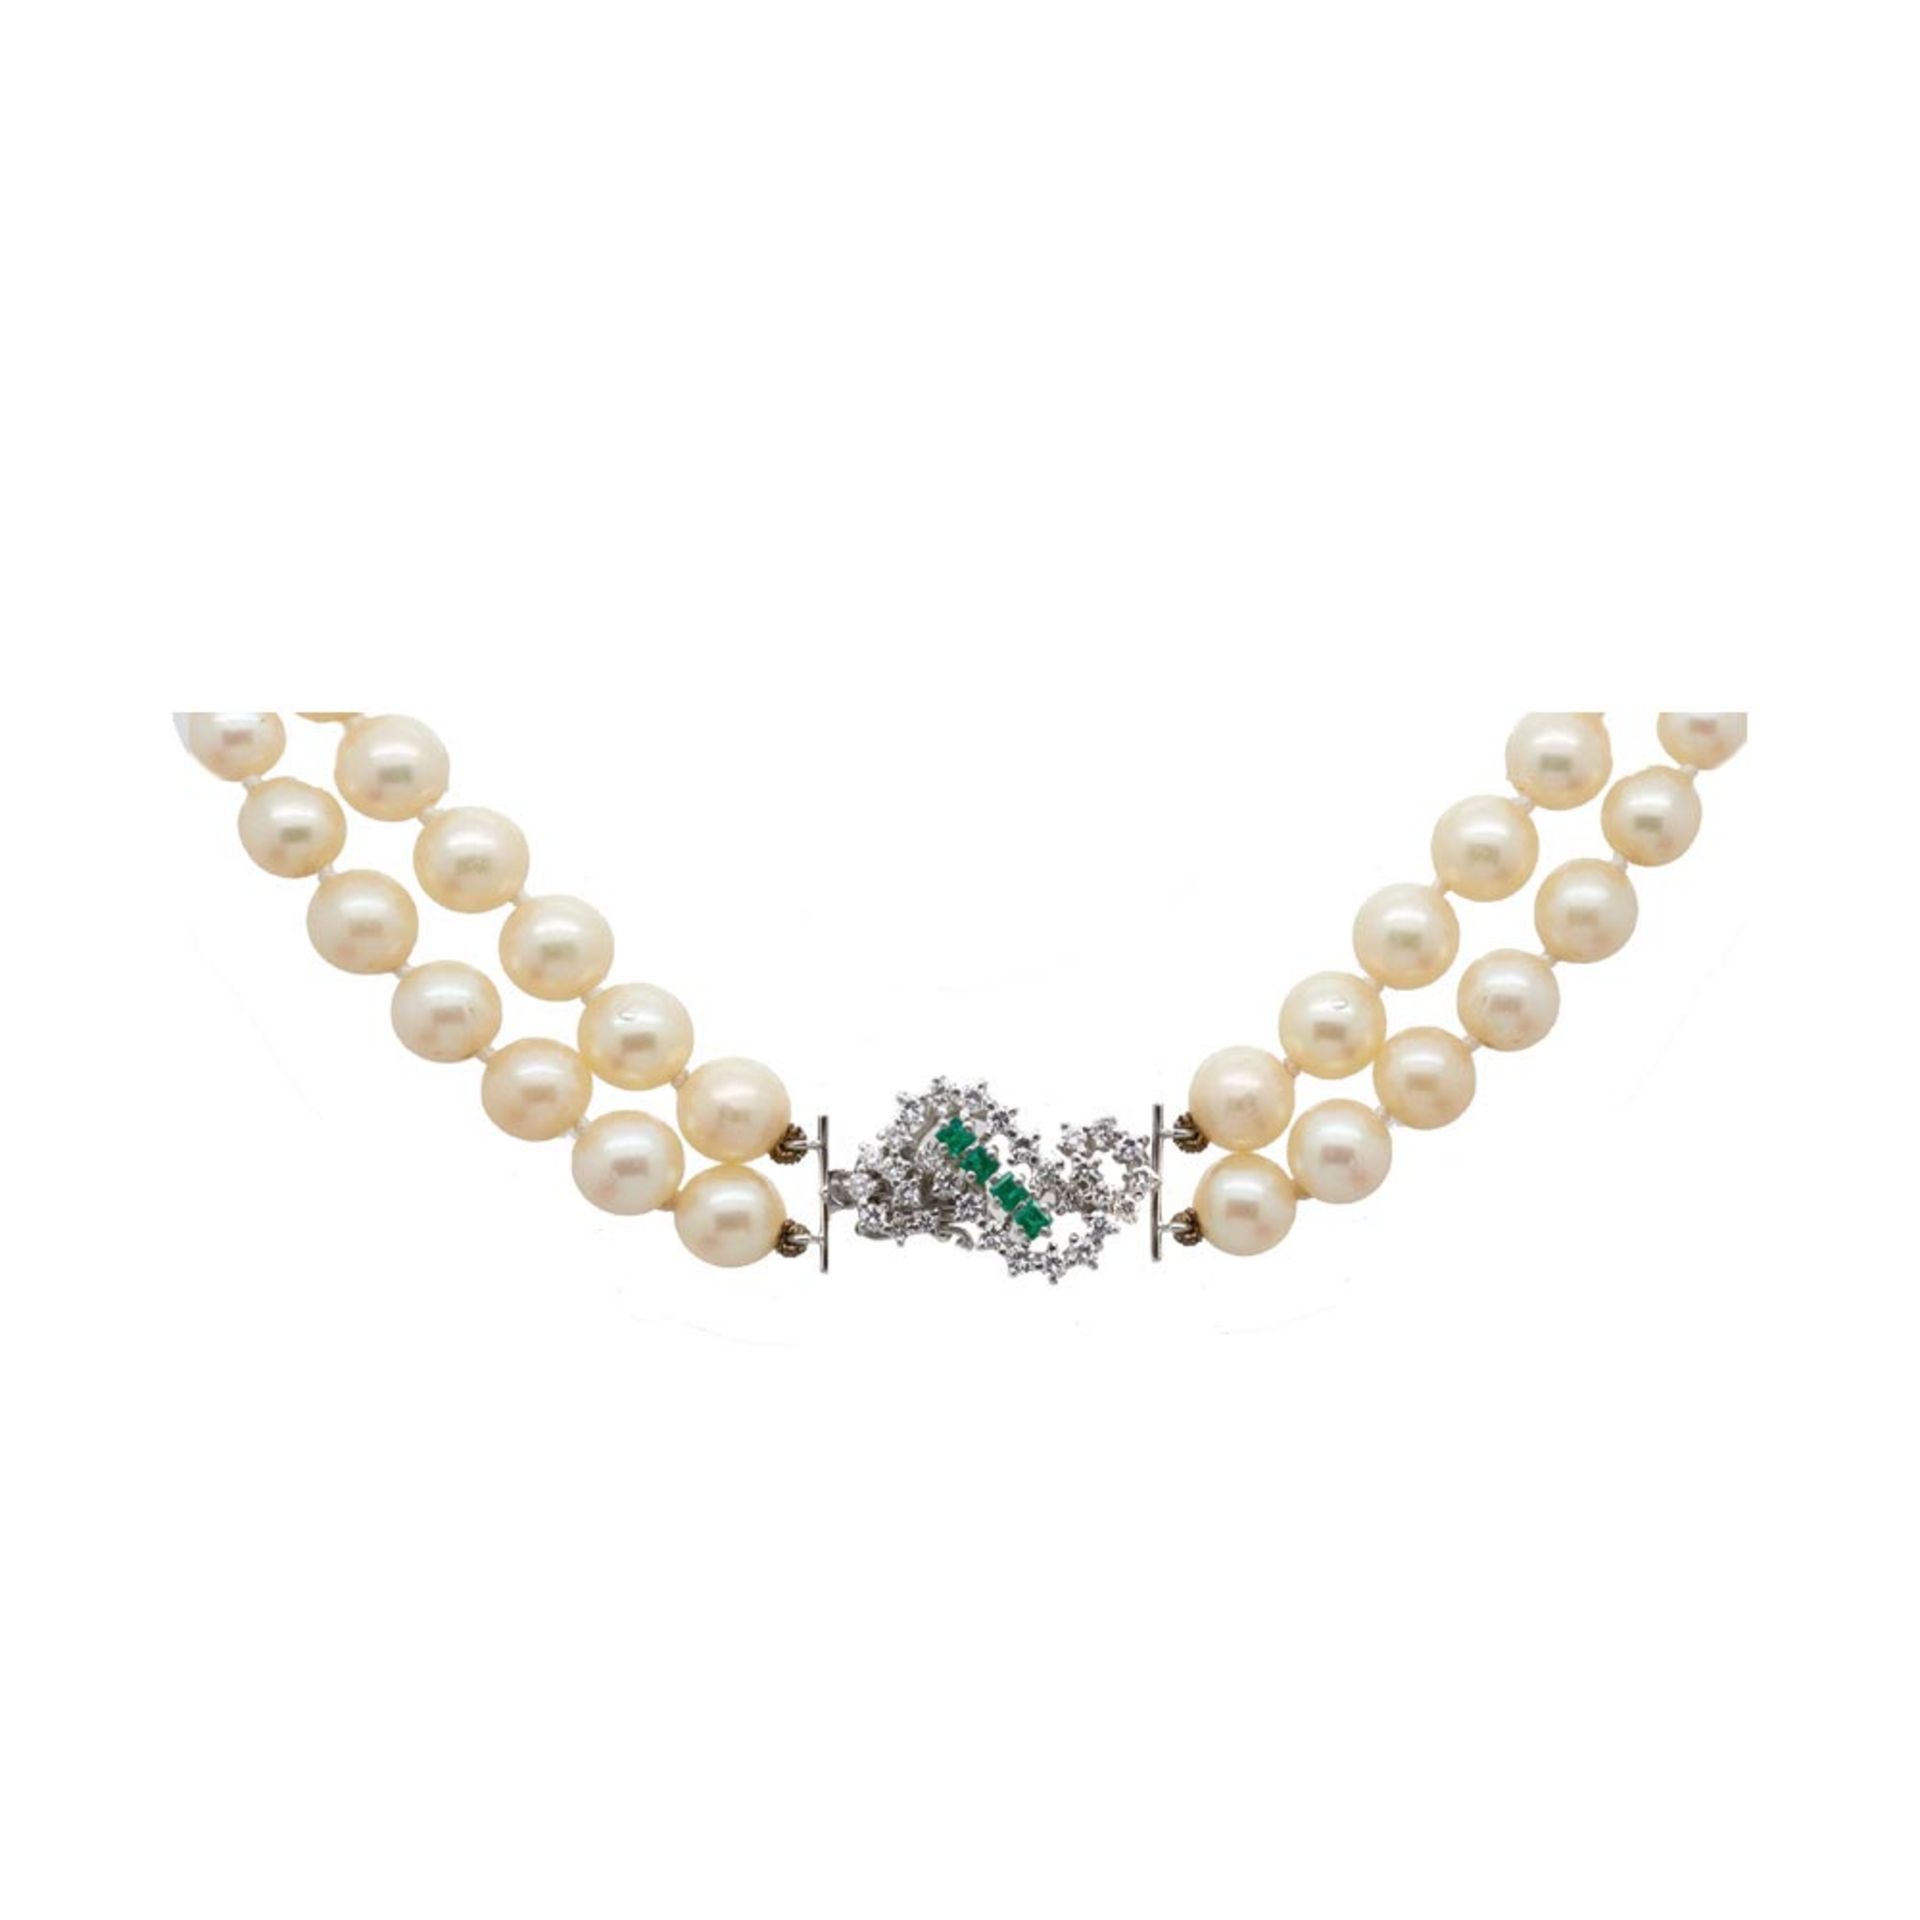 White gold, cultured pearls, emeralds and diamonds necklace